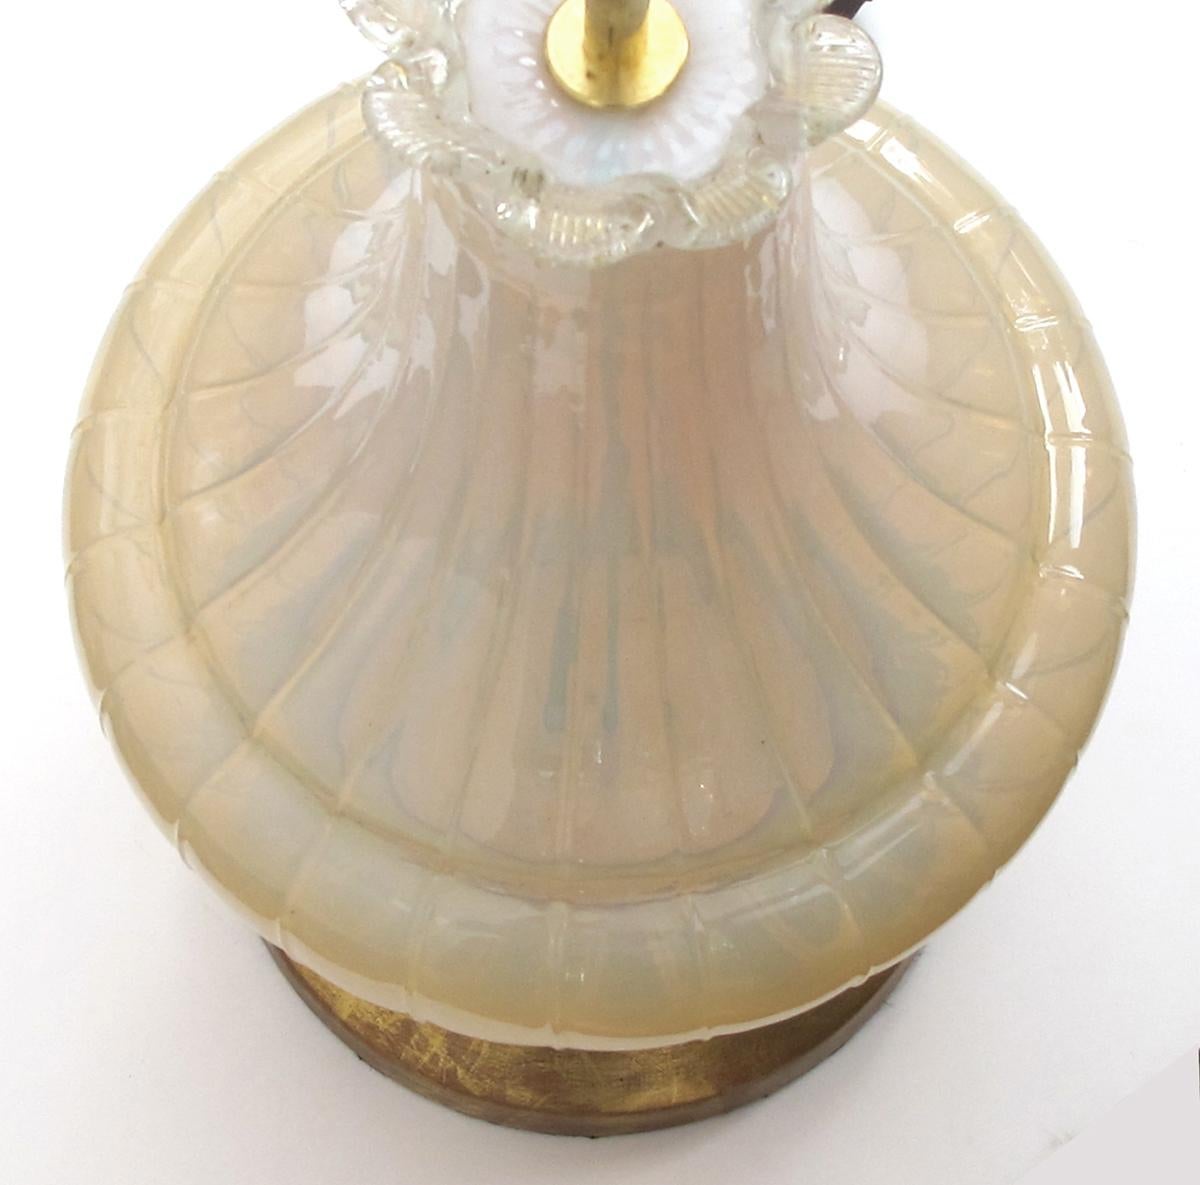 The hand blown lamp with long sweeping neck above a bulbous body all in a soft translucent pale yellow glass.